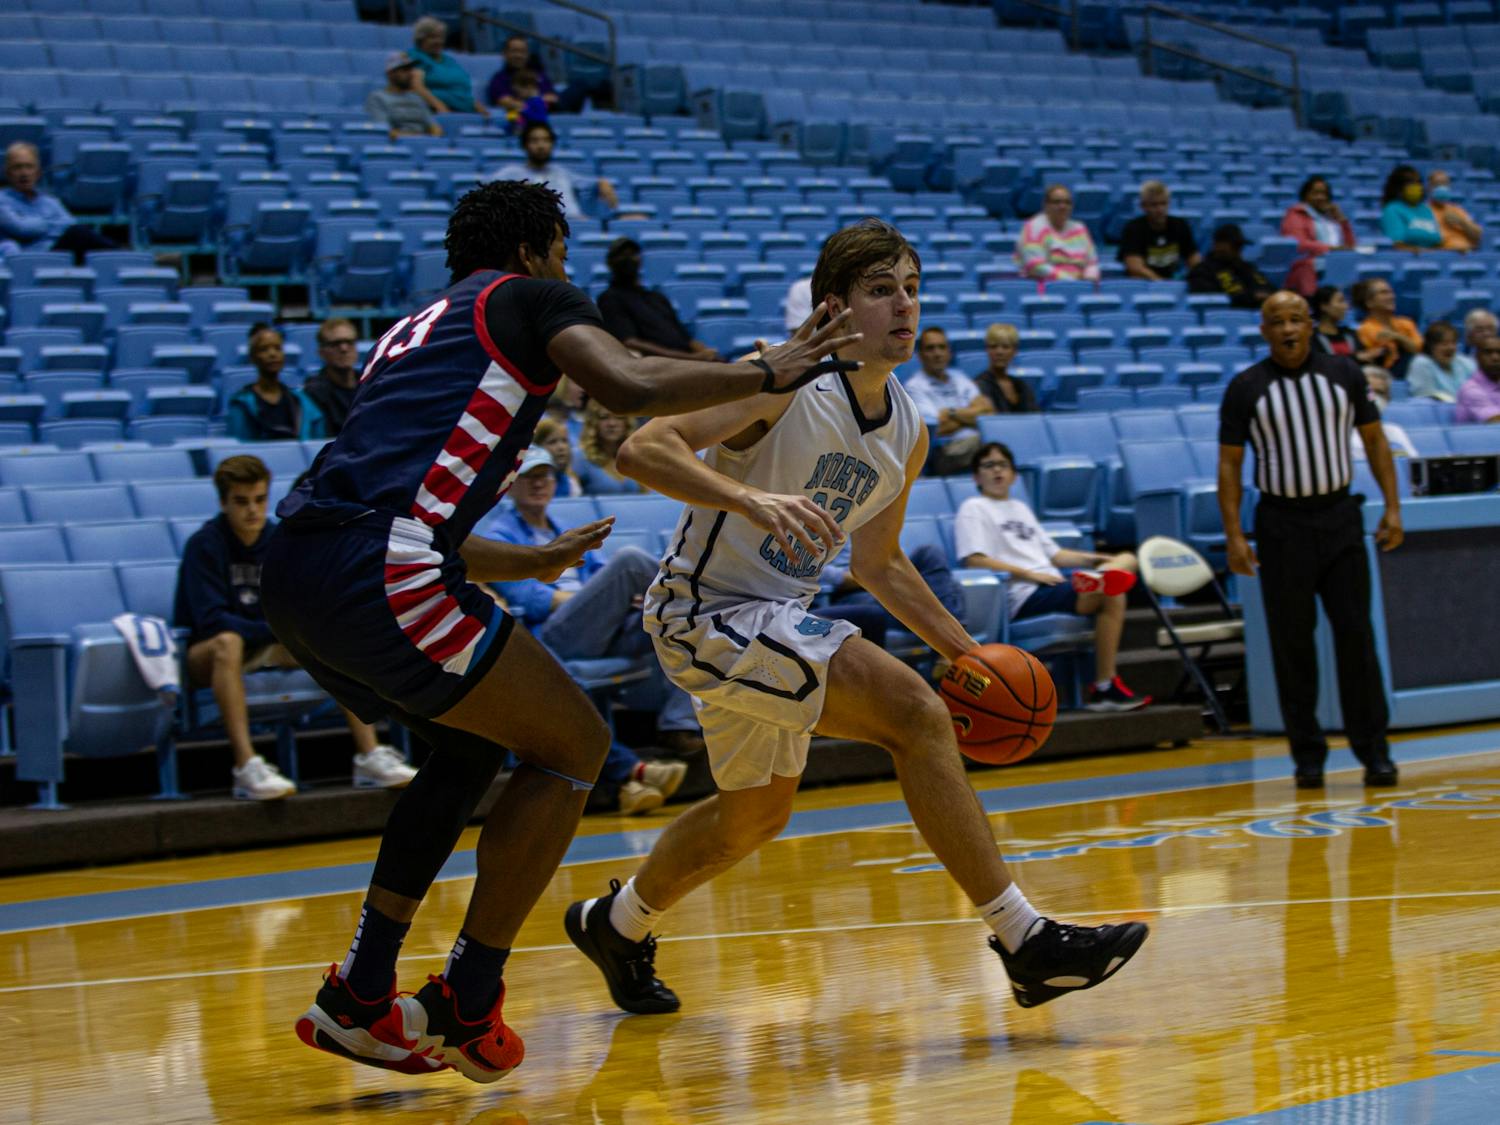 Sophomore forward William Tyndall (32) driving to the basket during the game against Athletes in Action in Dean E. Smith Center on Nov. 11, 2022.